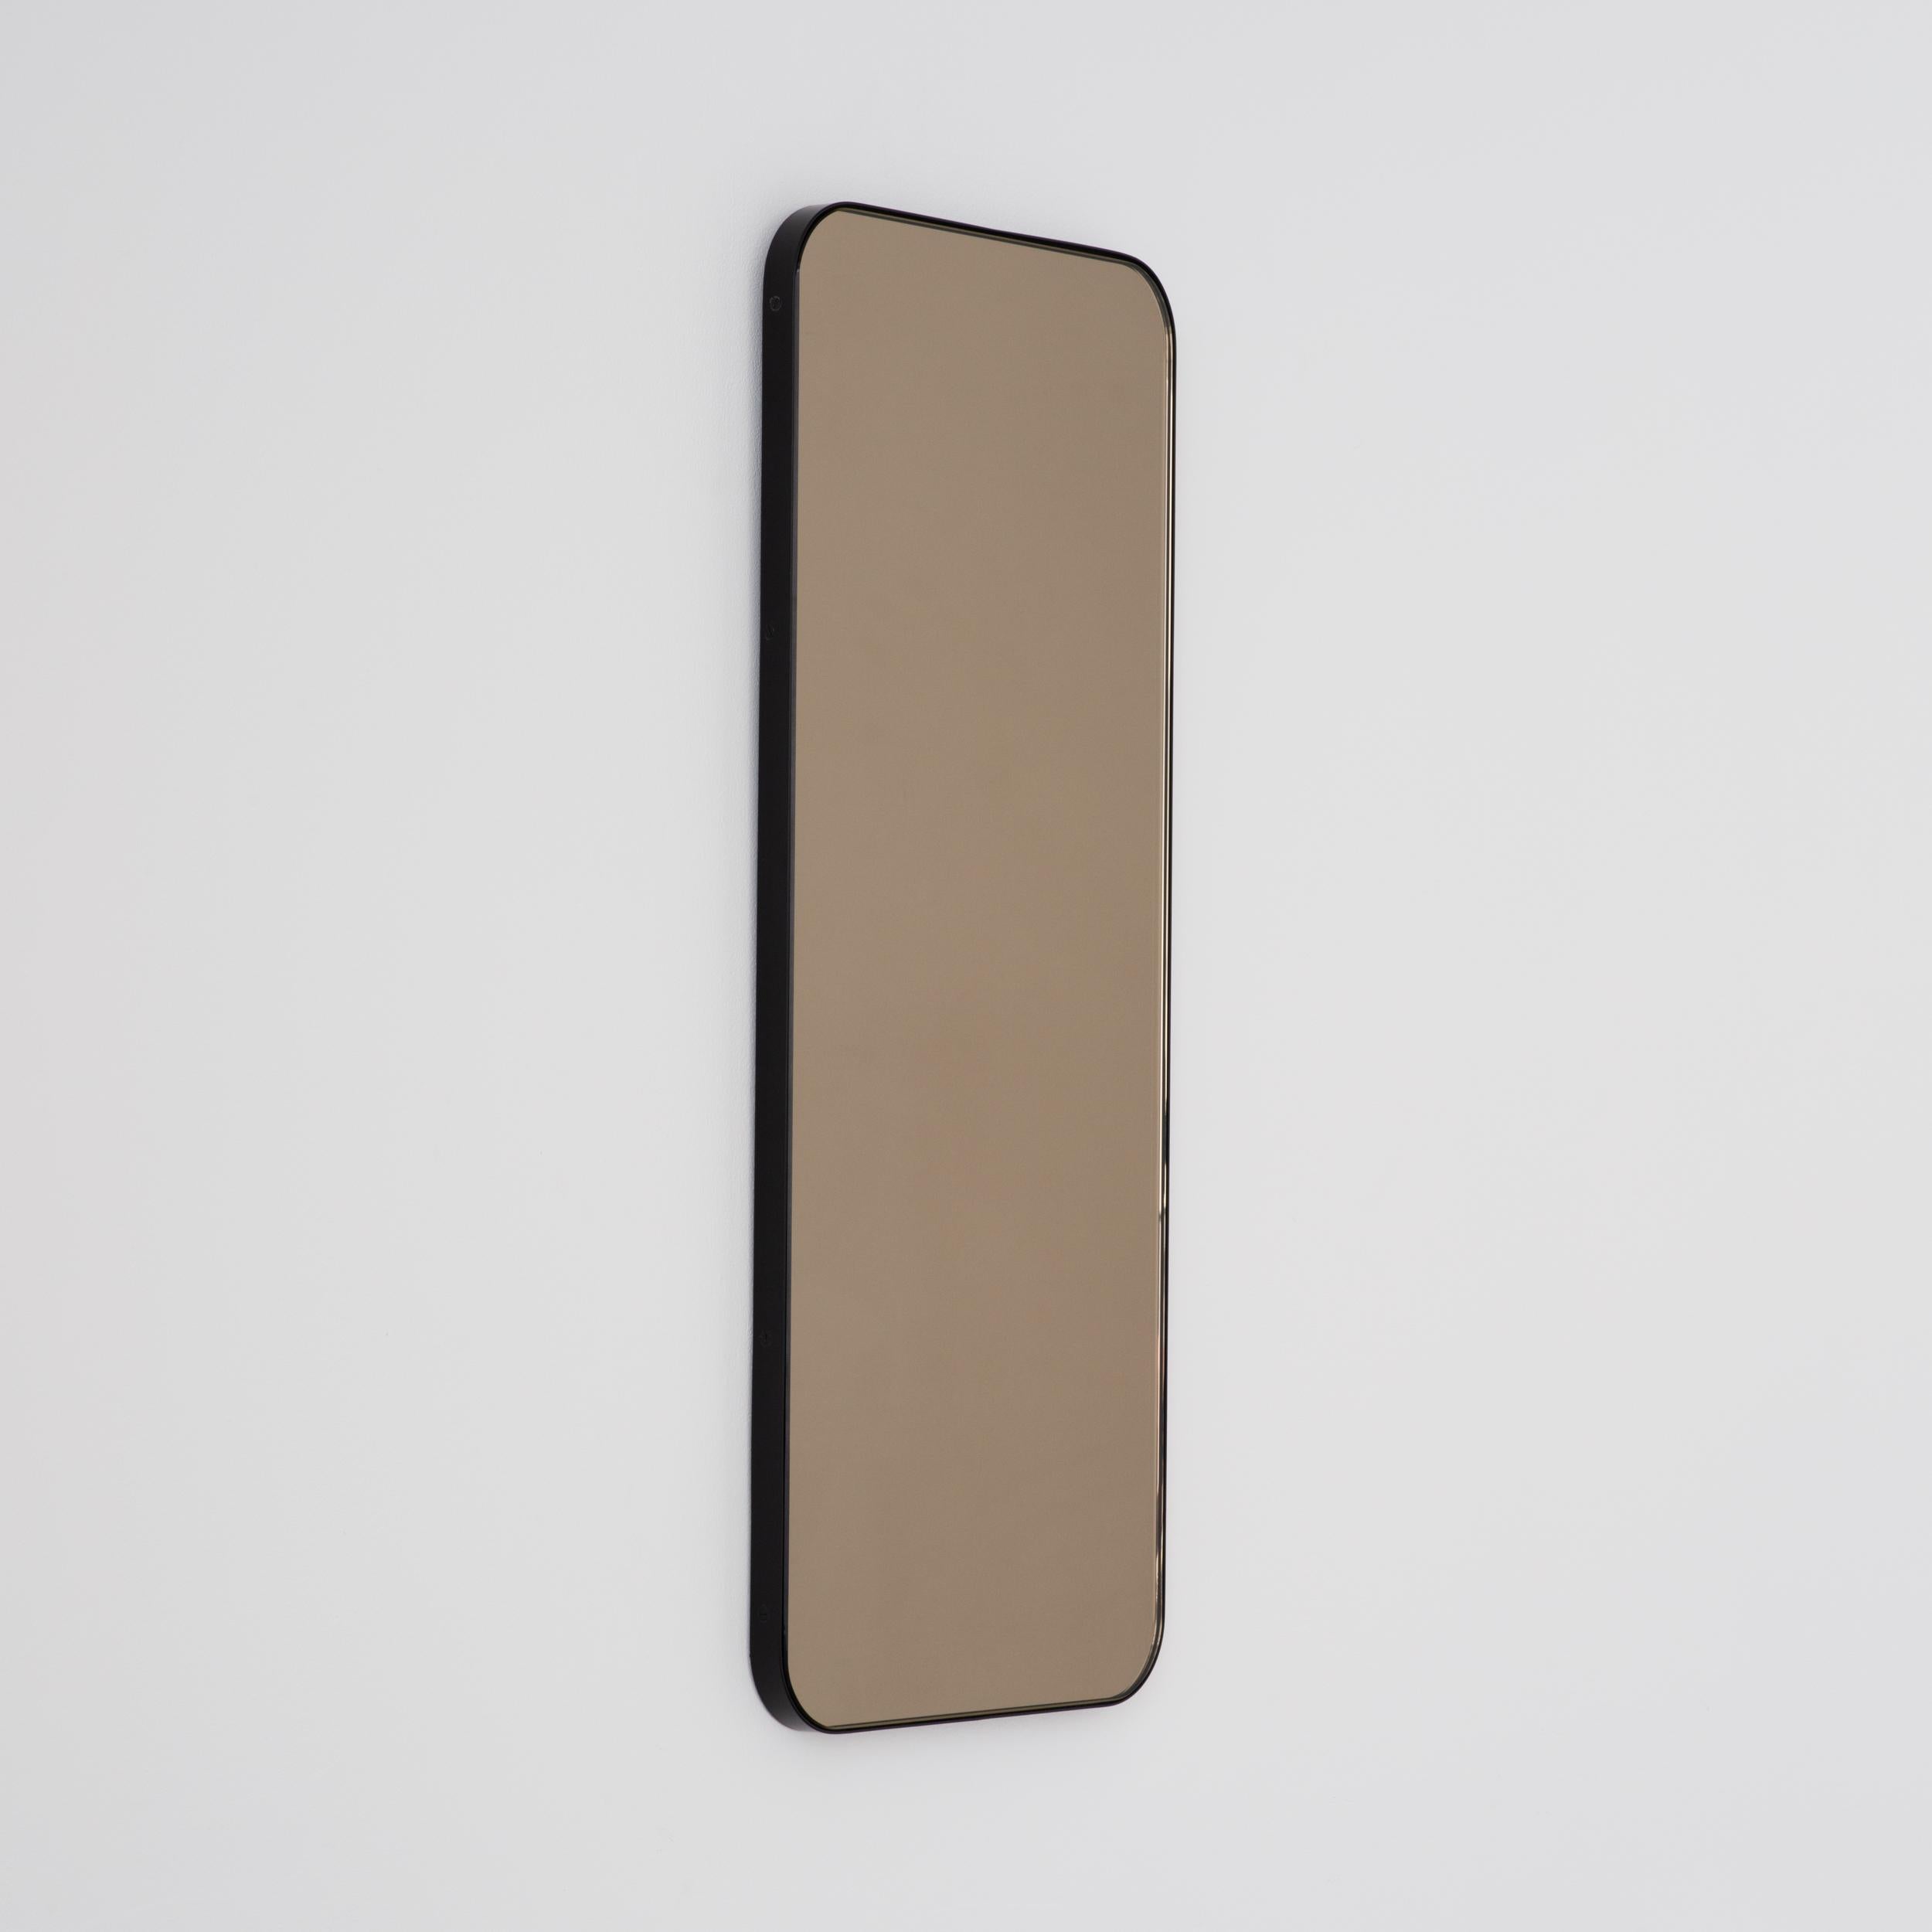 Contemporary bronze tinted Quadris™ rectangular mirror with an elegant black frame. Designed and handcrafted in London, UK. 

Our mirrors are designed with an integrated French cleat (split batten) system that ensures the mirror is securely mounted